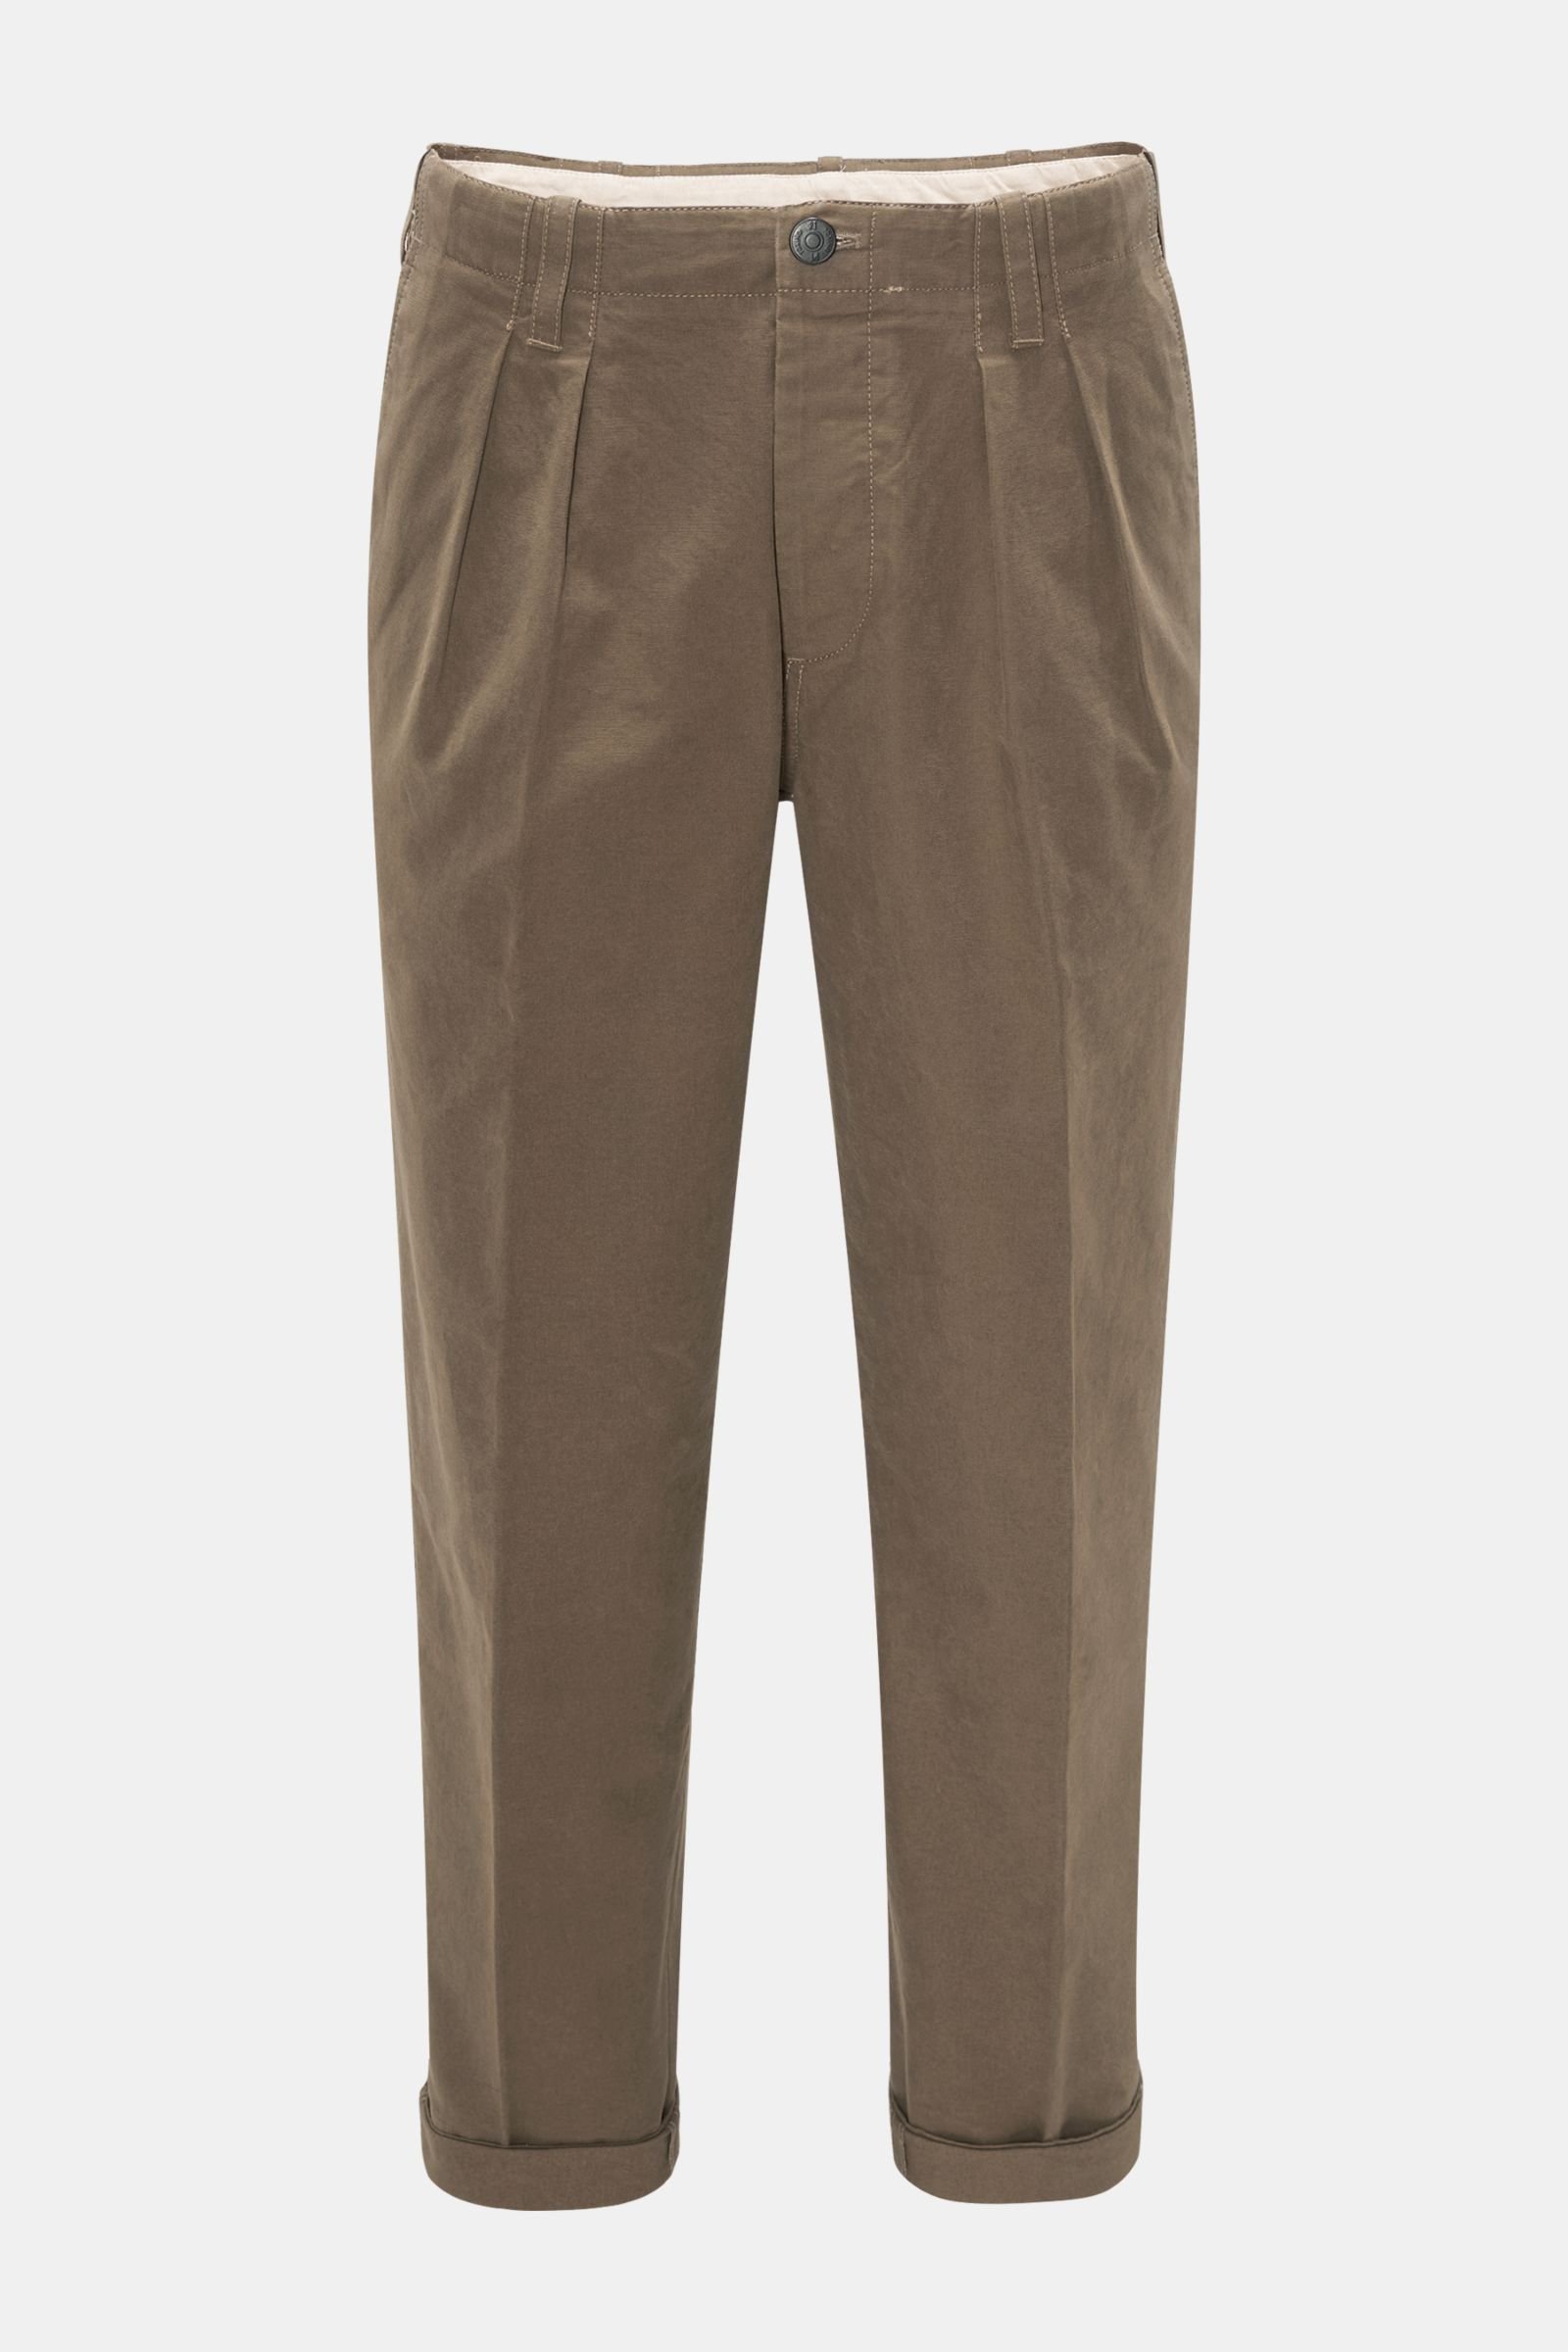 Cotton trousers 'Carrot Fit' grey-brown